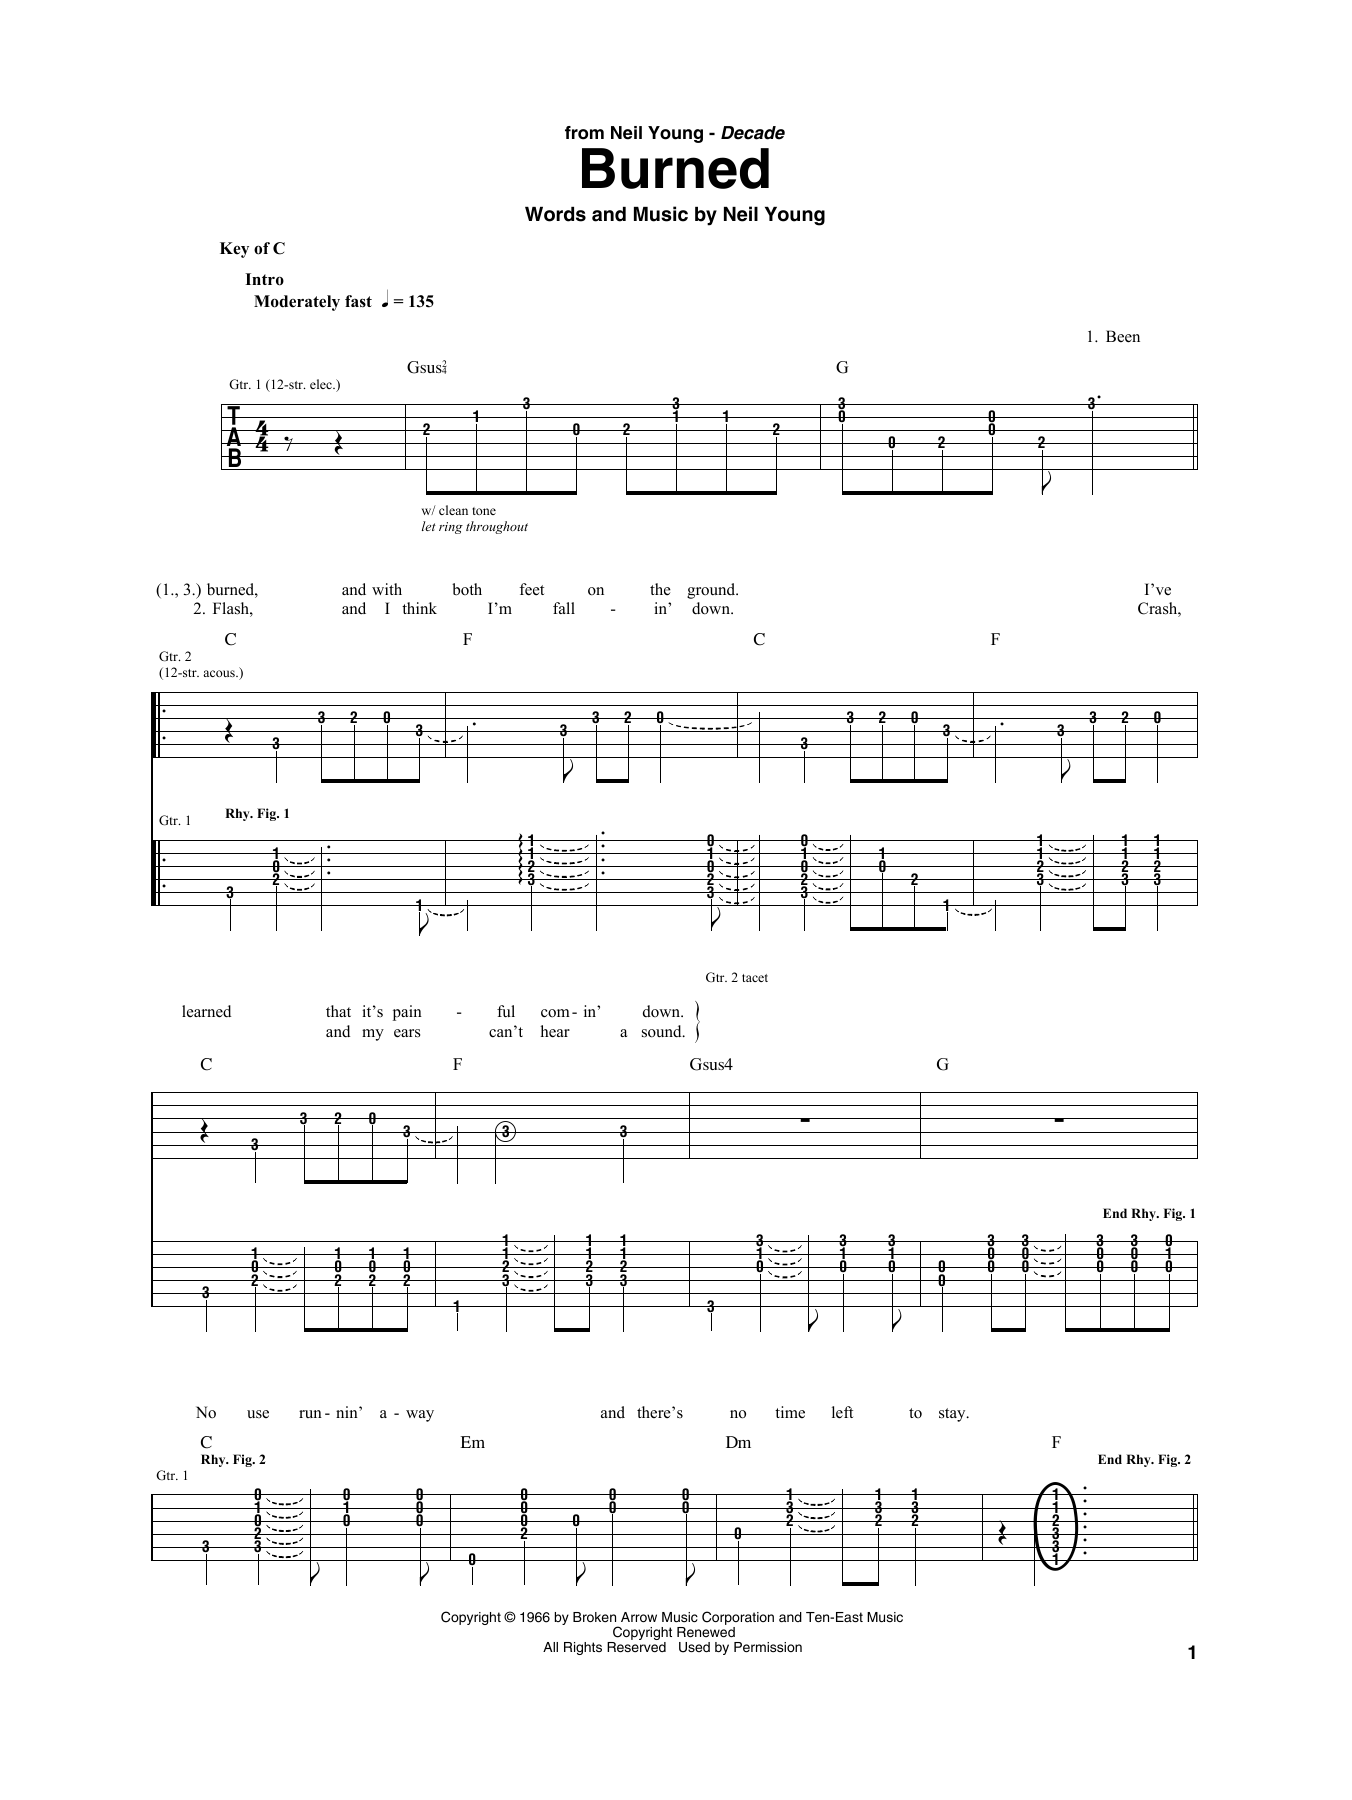 Download Neil Young Burned Sheet Music